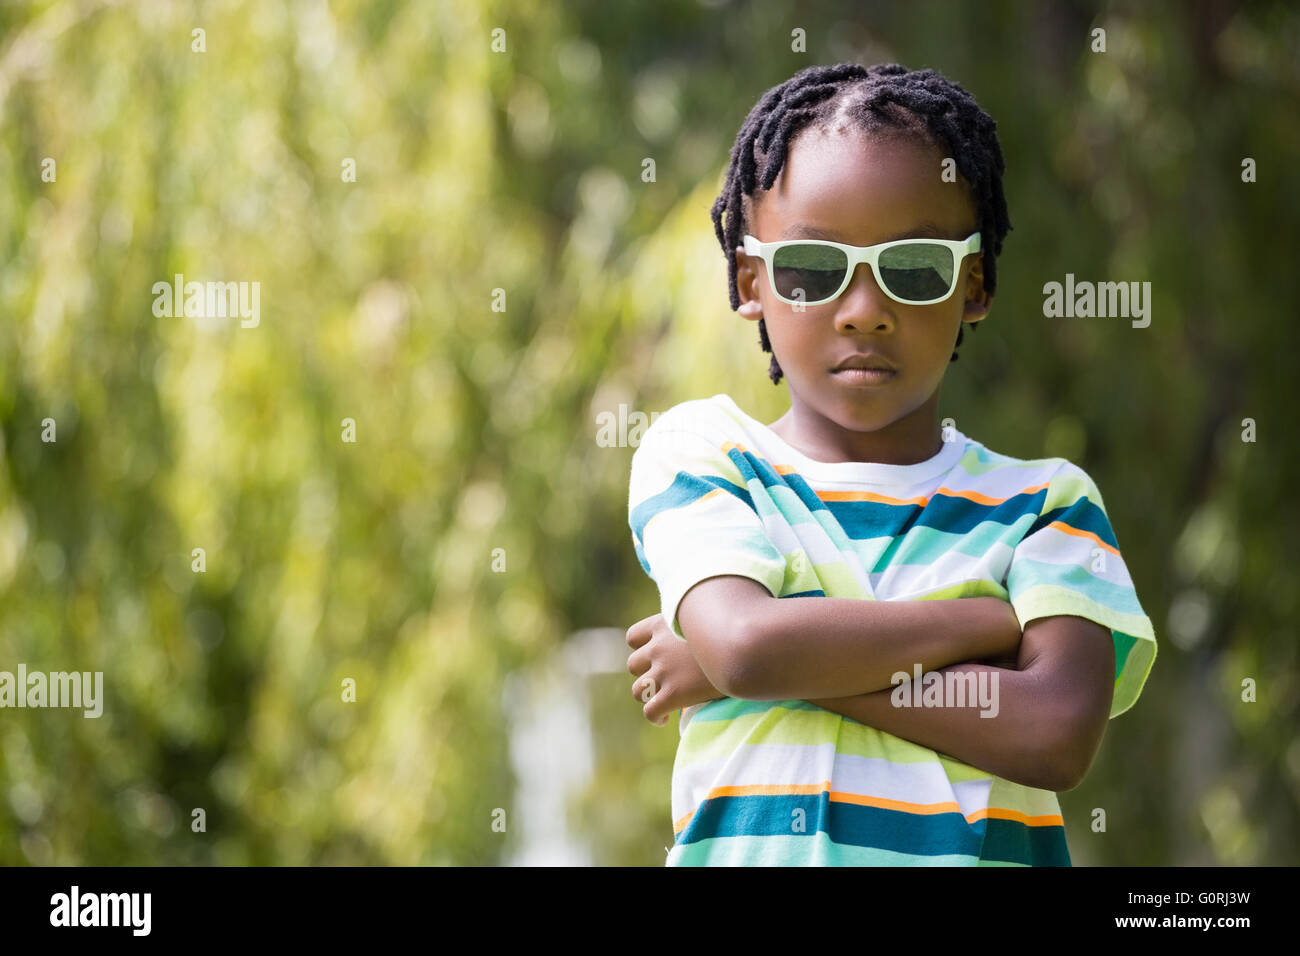 A kid with sunglasses crossing his arms Stock Photo